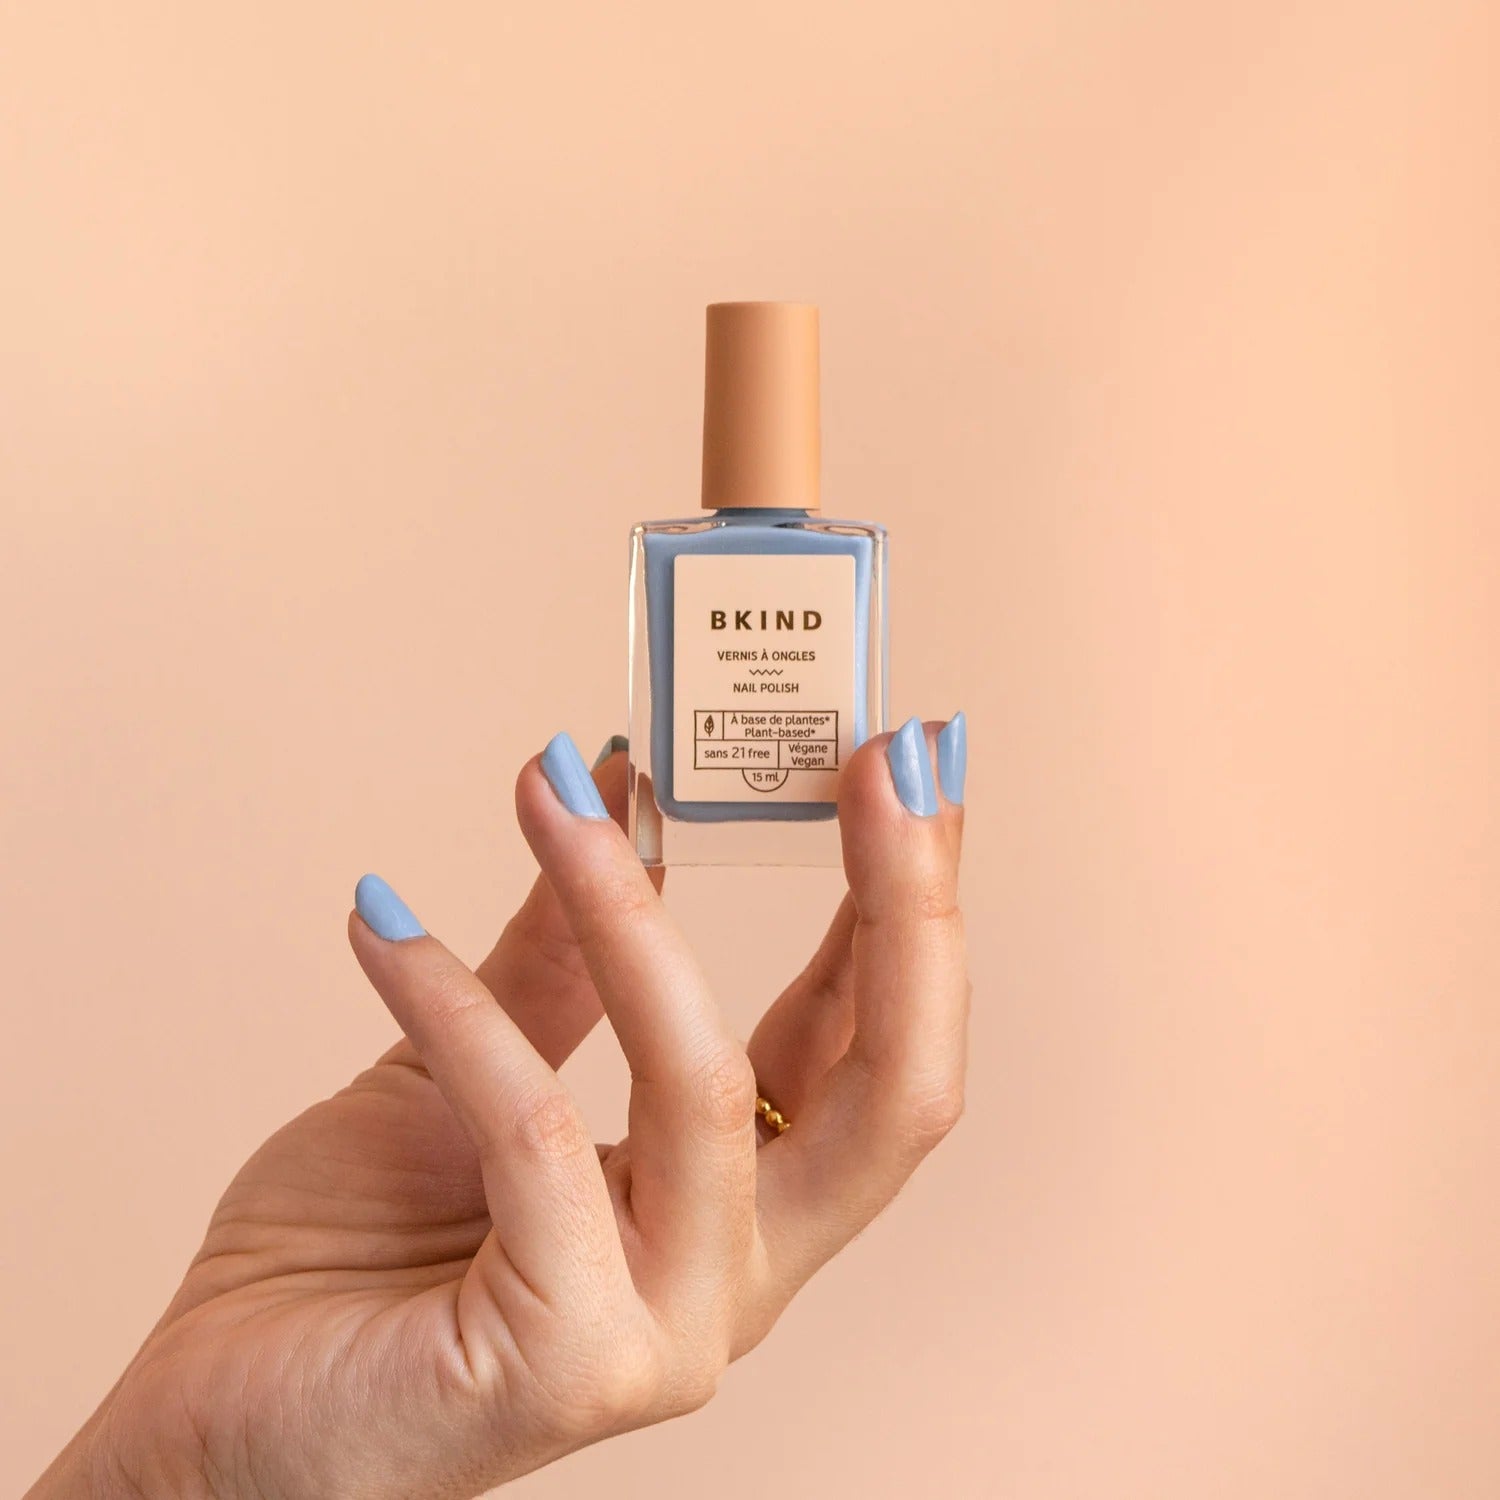 Vernis à ongles - Jean-y in a bottle